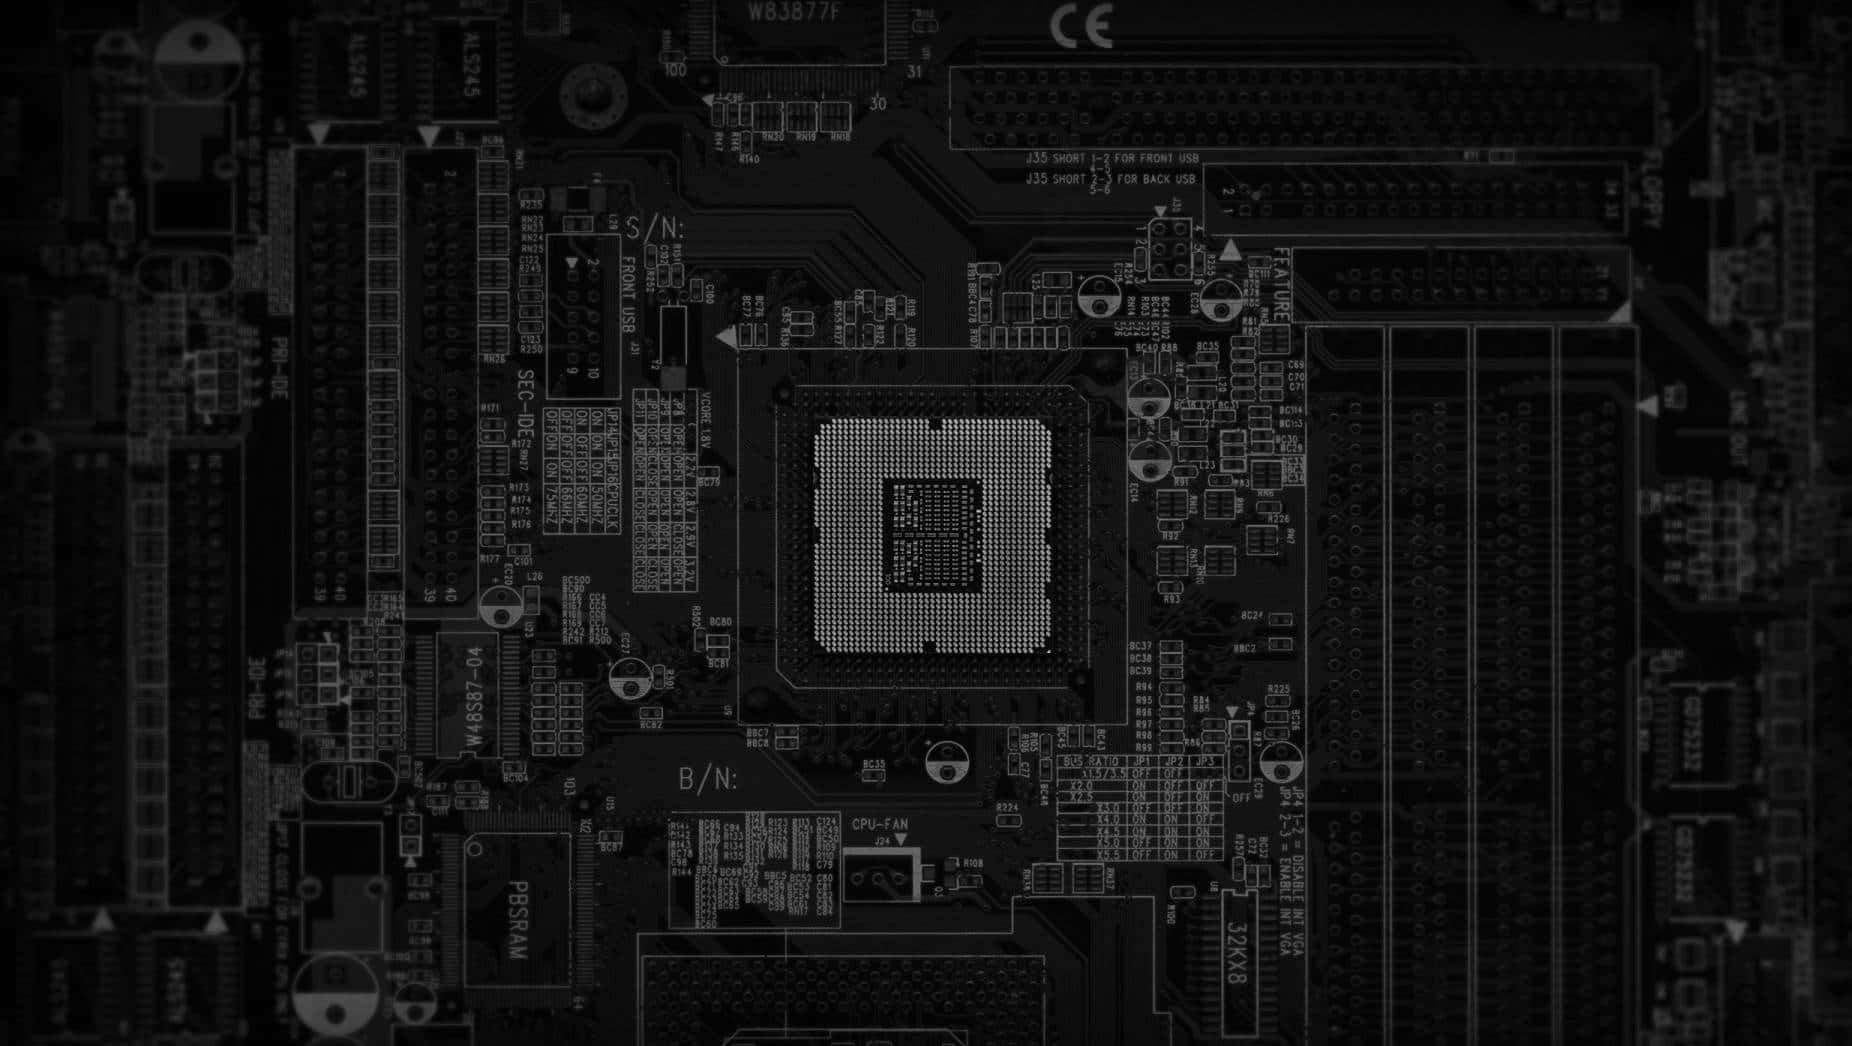 Close-up View of a High-tech Motherboard